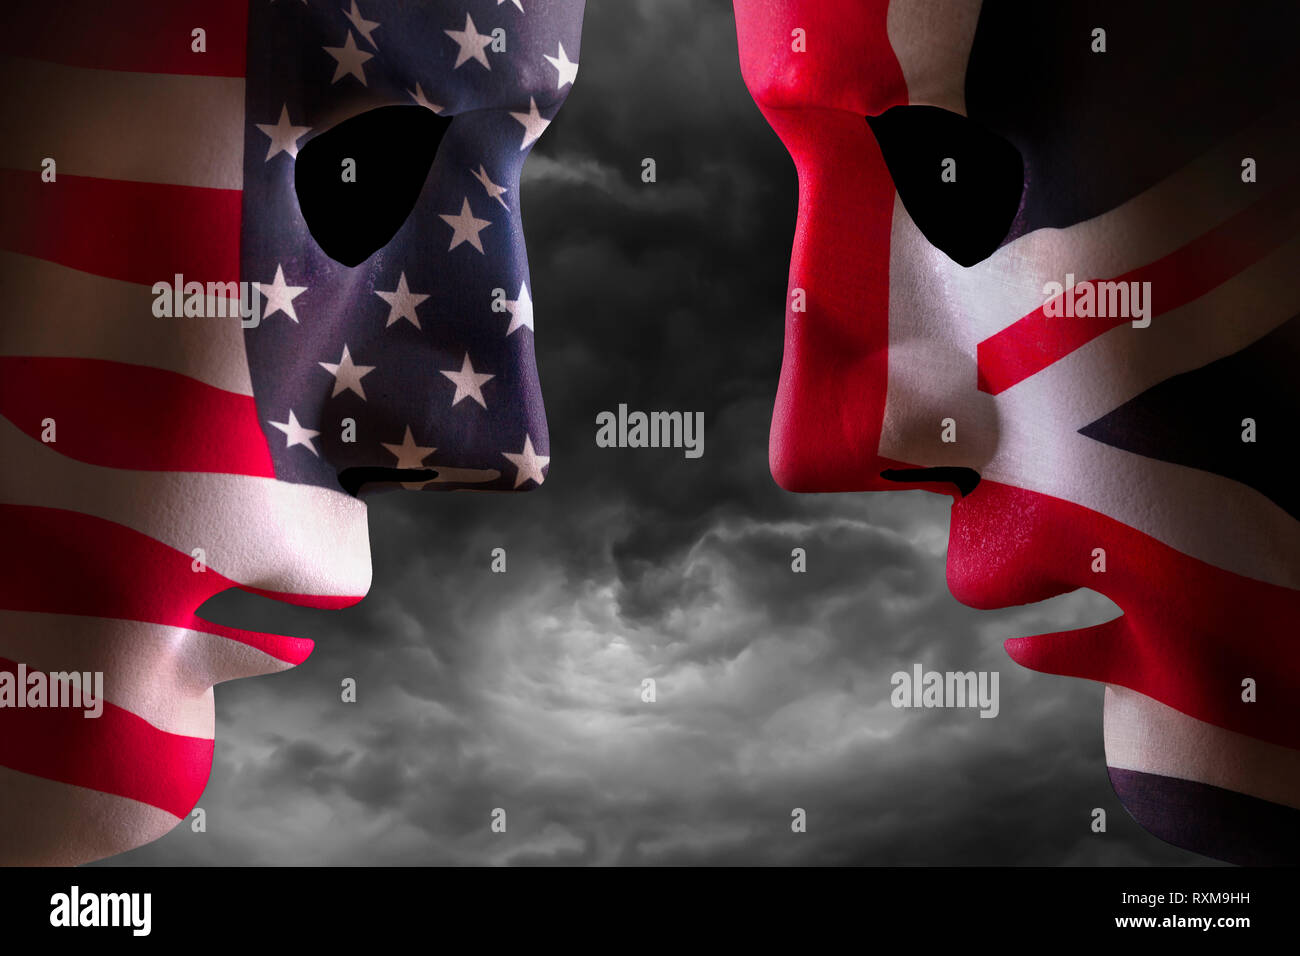 Head to head USA and UK faces with flag textures over the faces. Stormy clouds background. Stock Photo